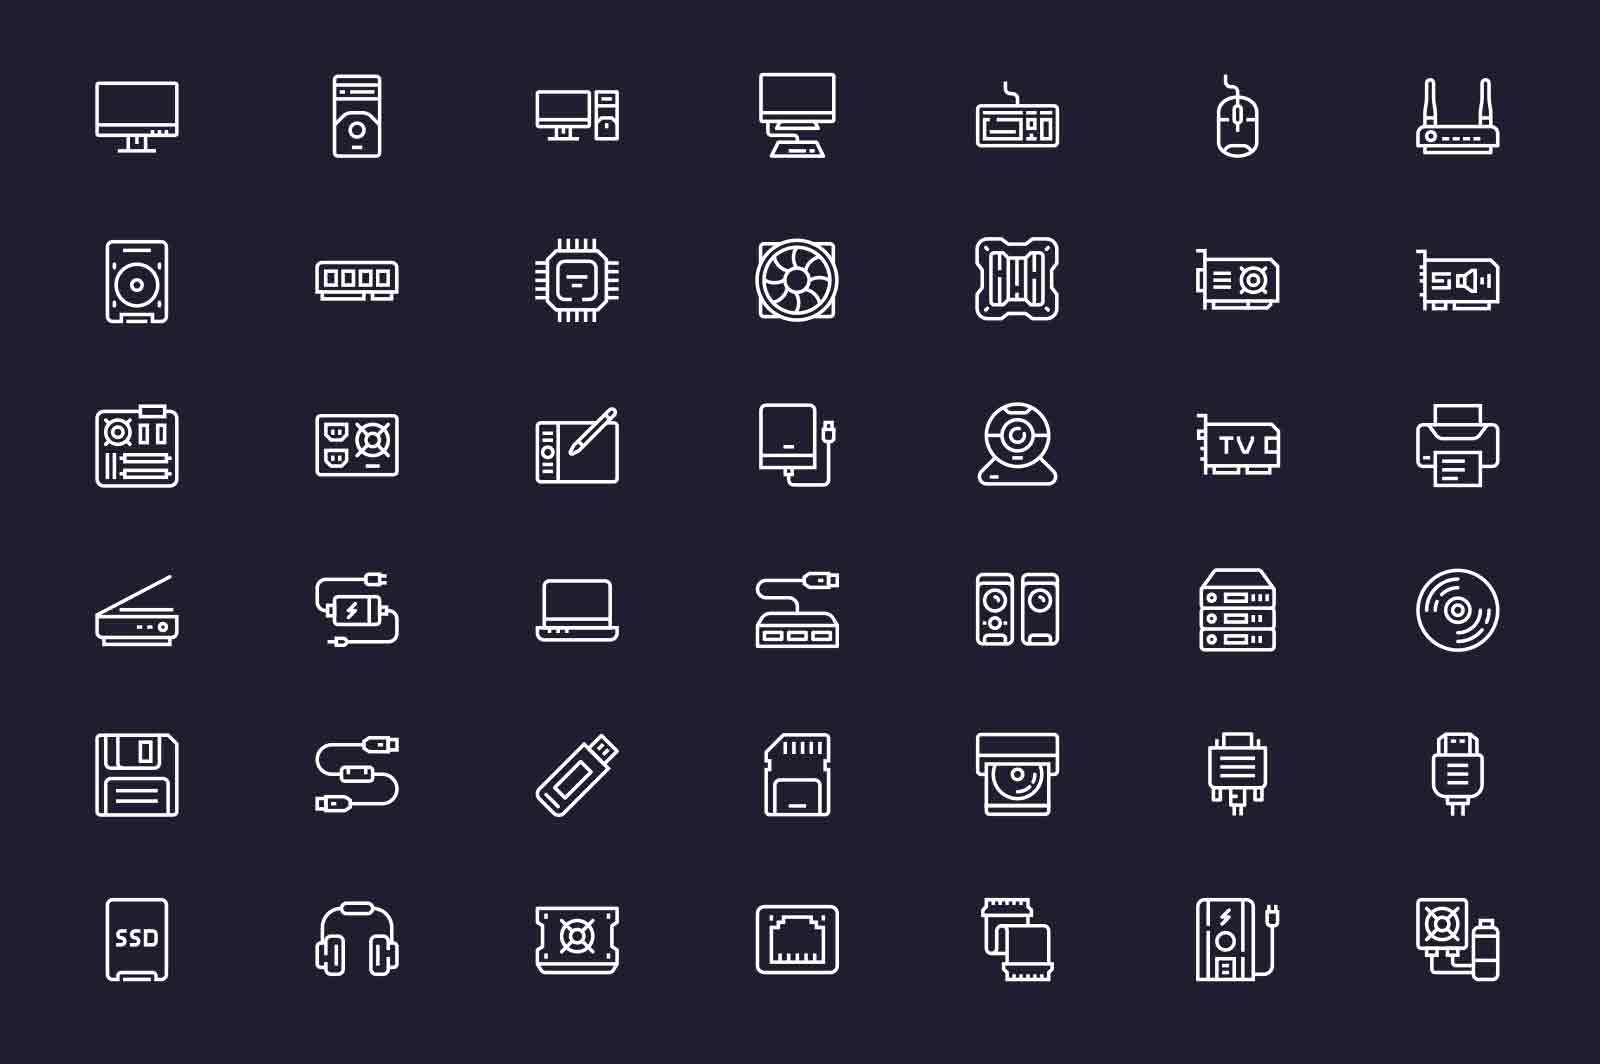 Modern digital devices icons set vector illustration. Computers and accessories line icon. Dark background